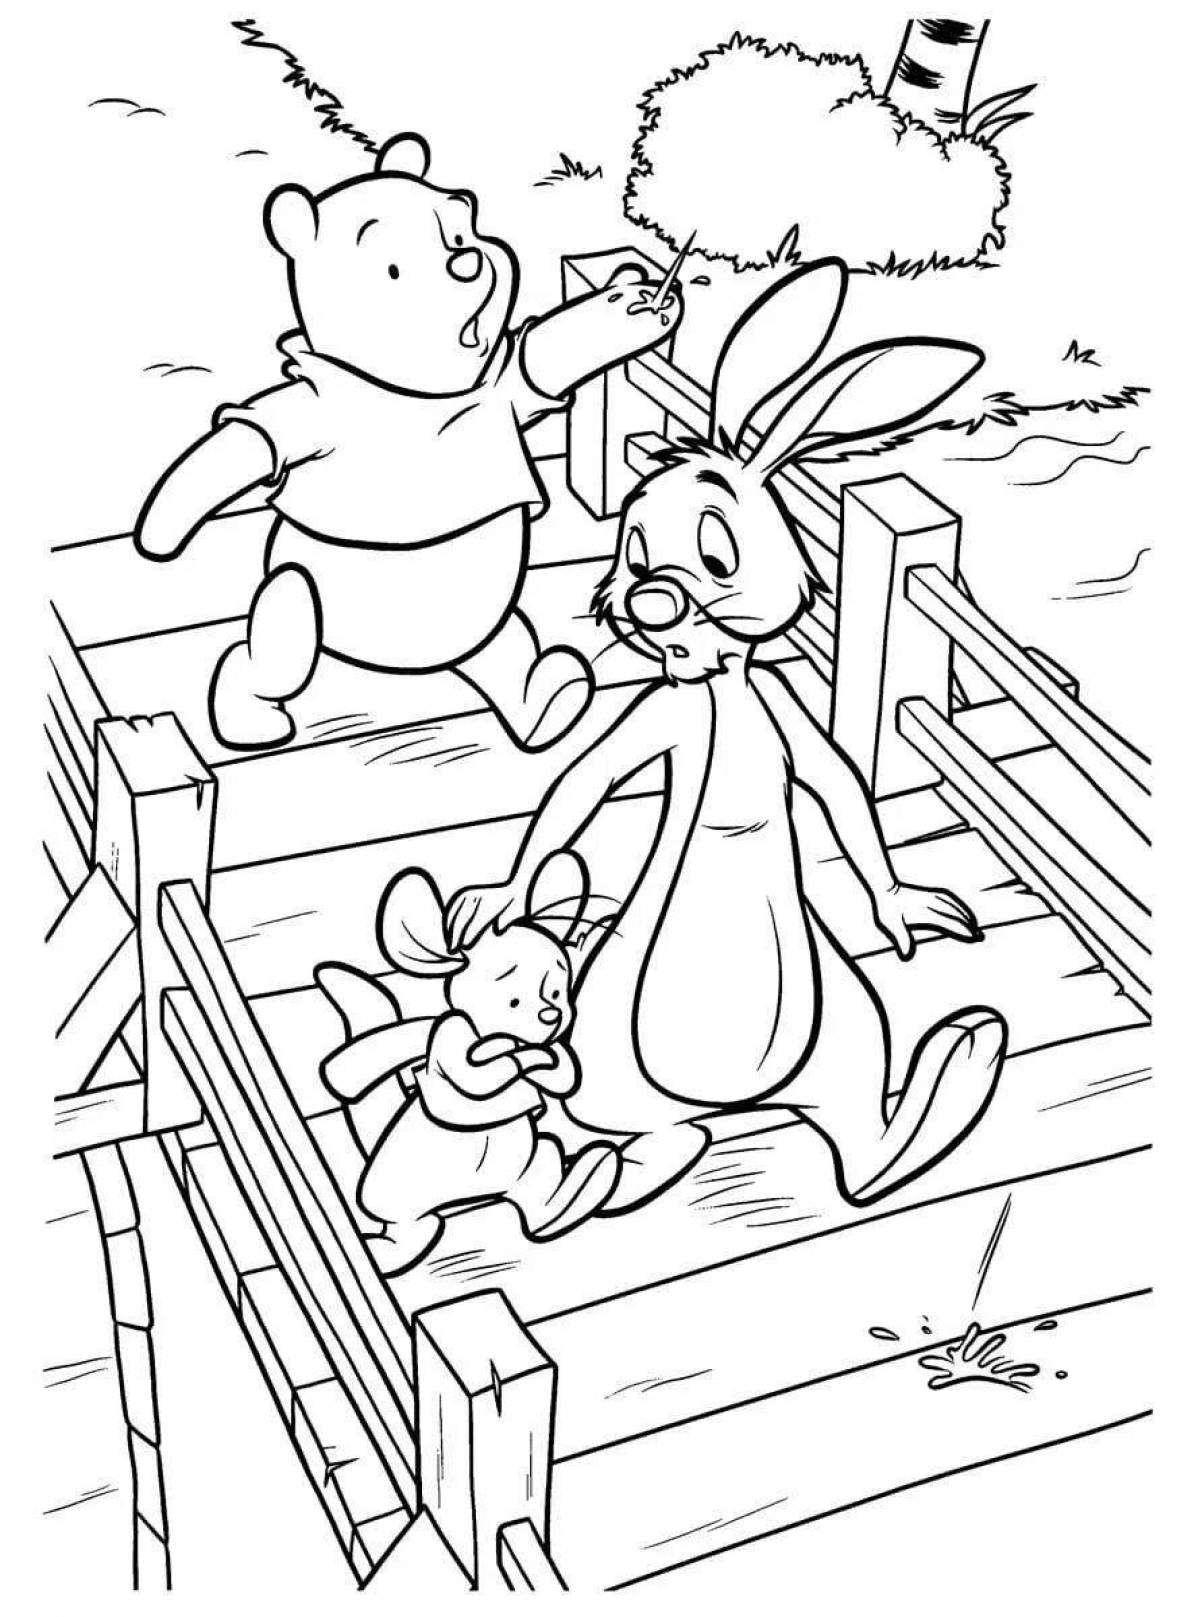 Coloring Winnie the Pooh and Friends